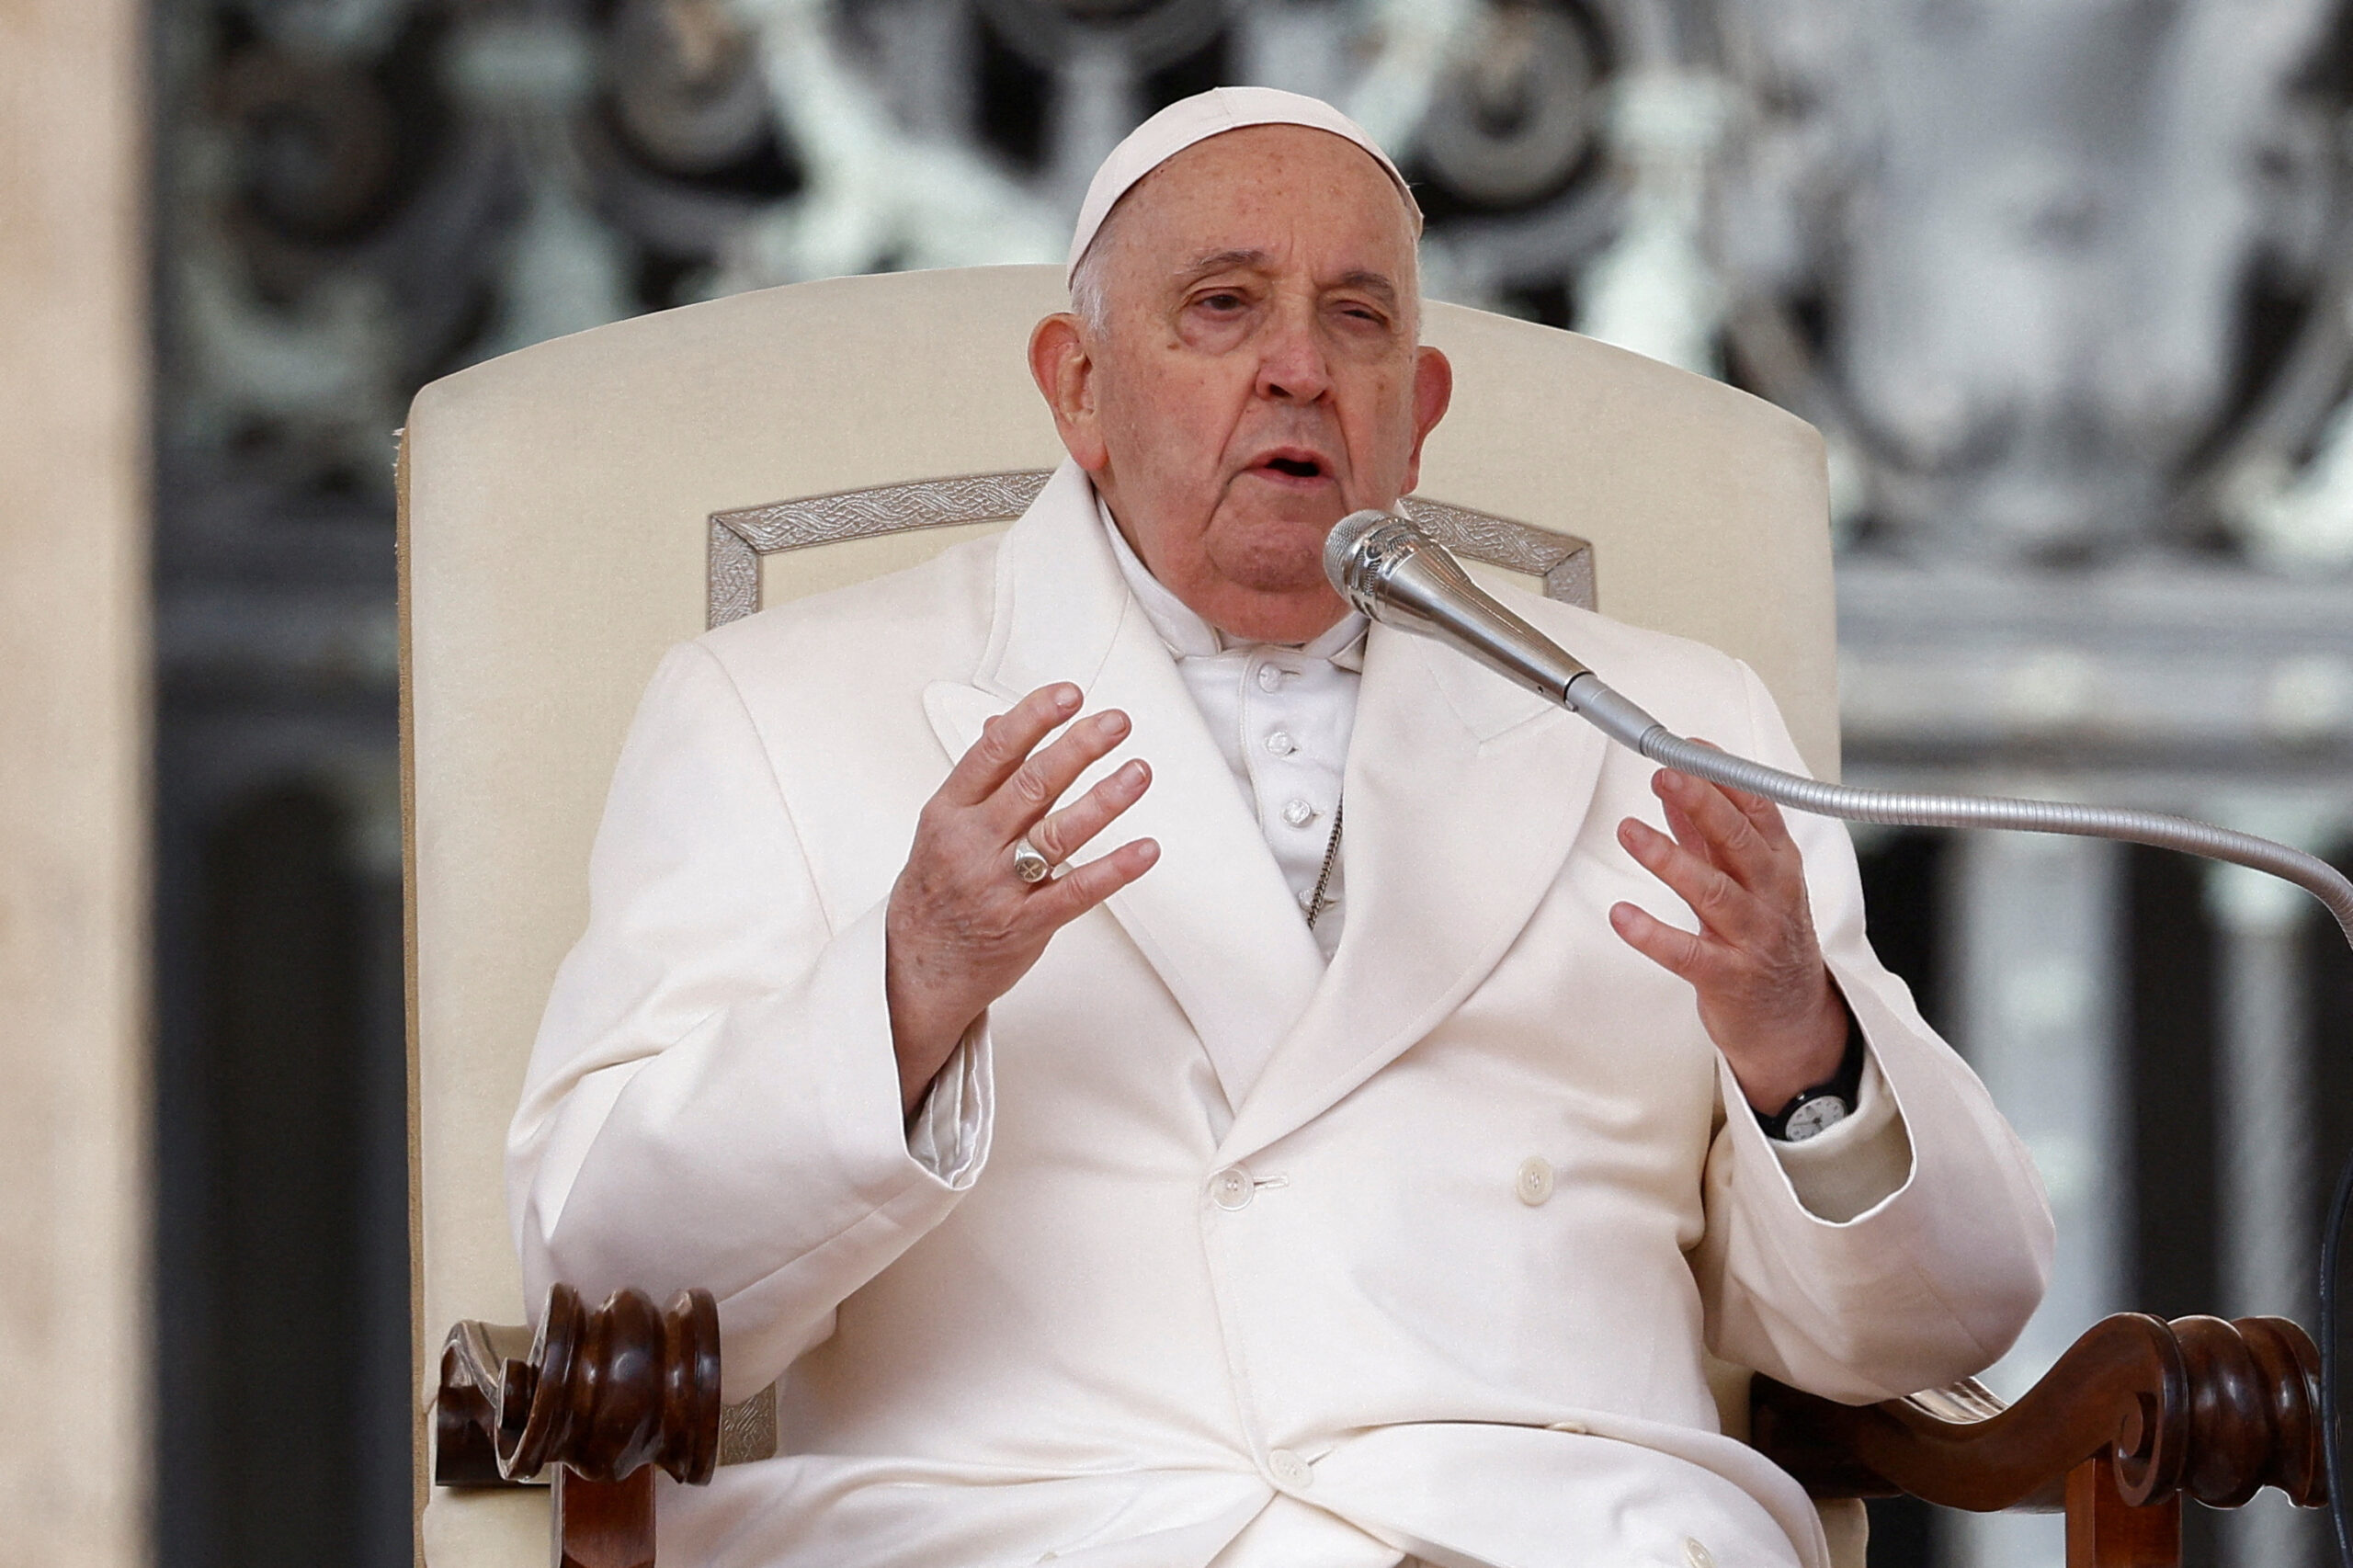 Pope says option of resigning is only 'a distant hypothesis'